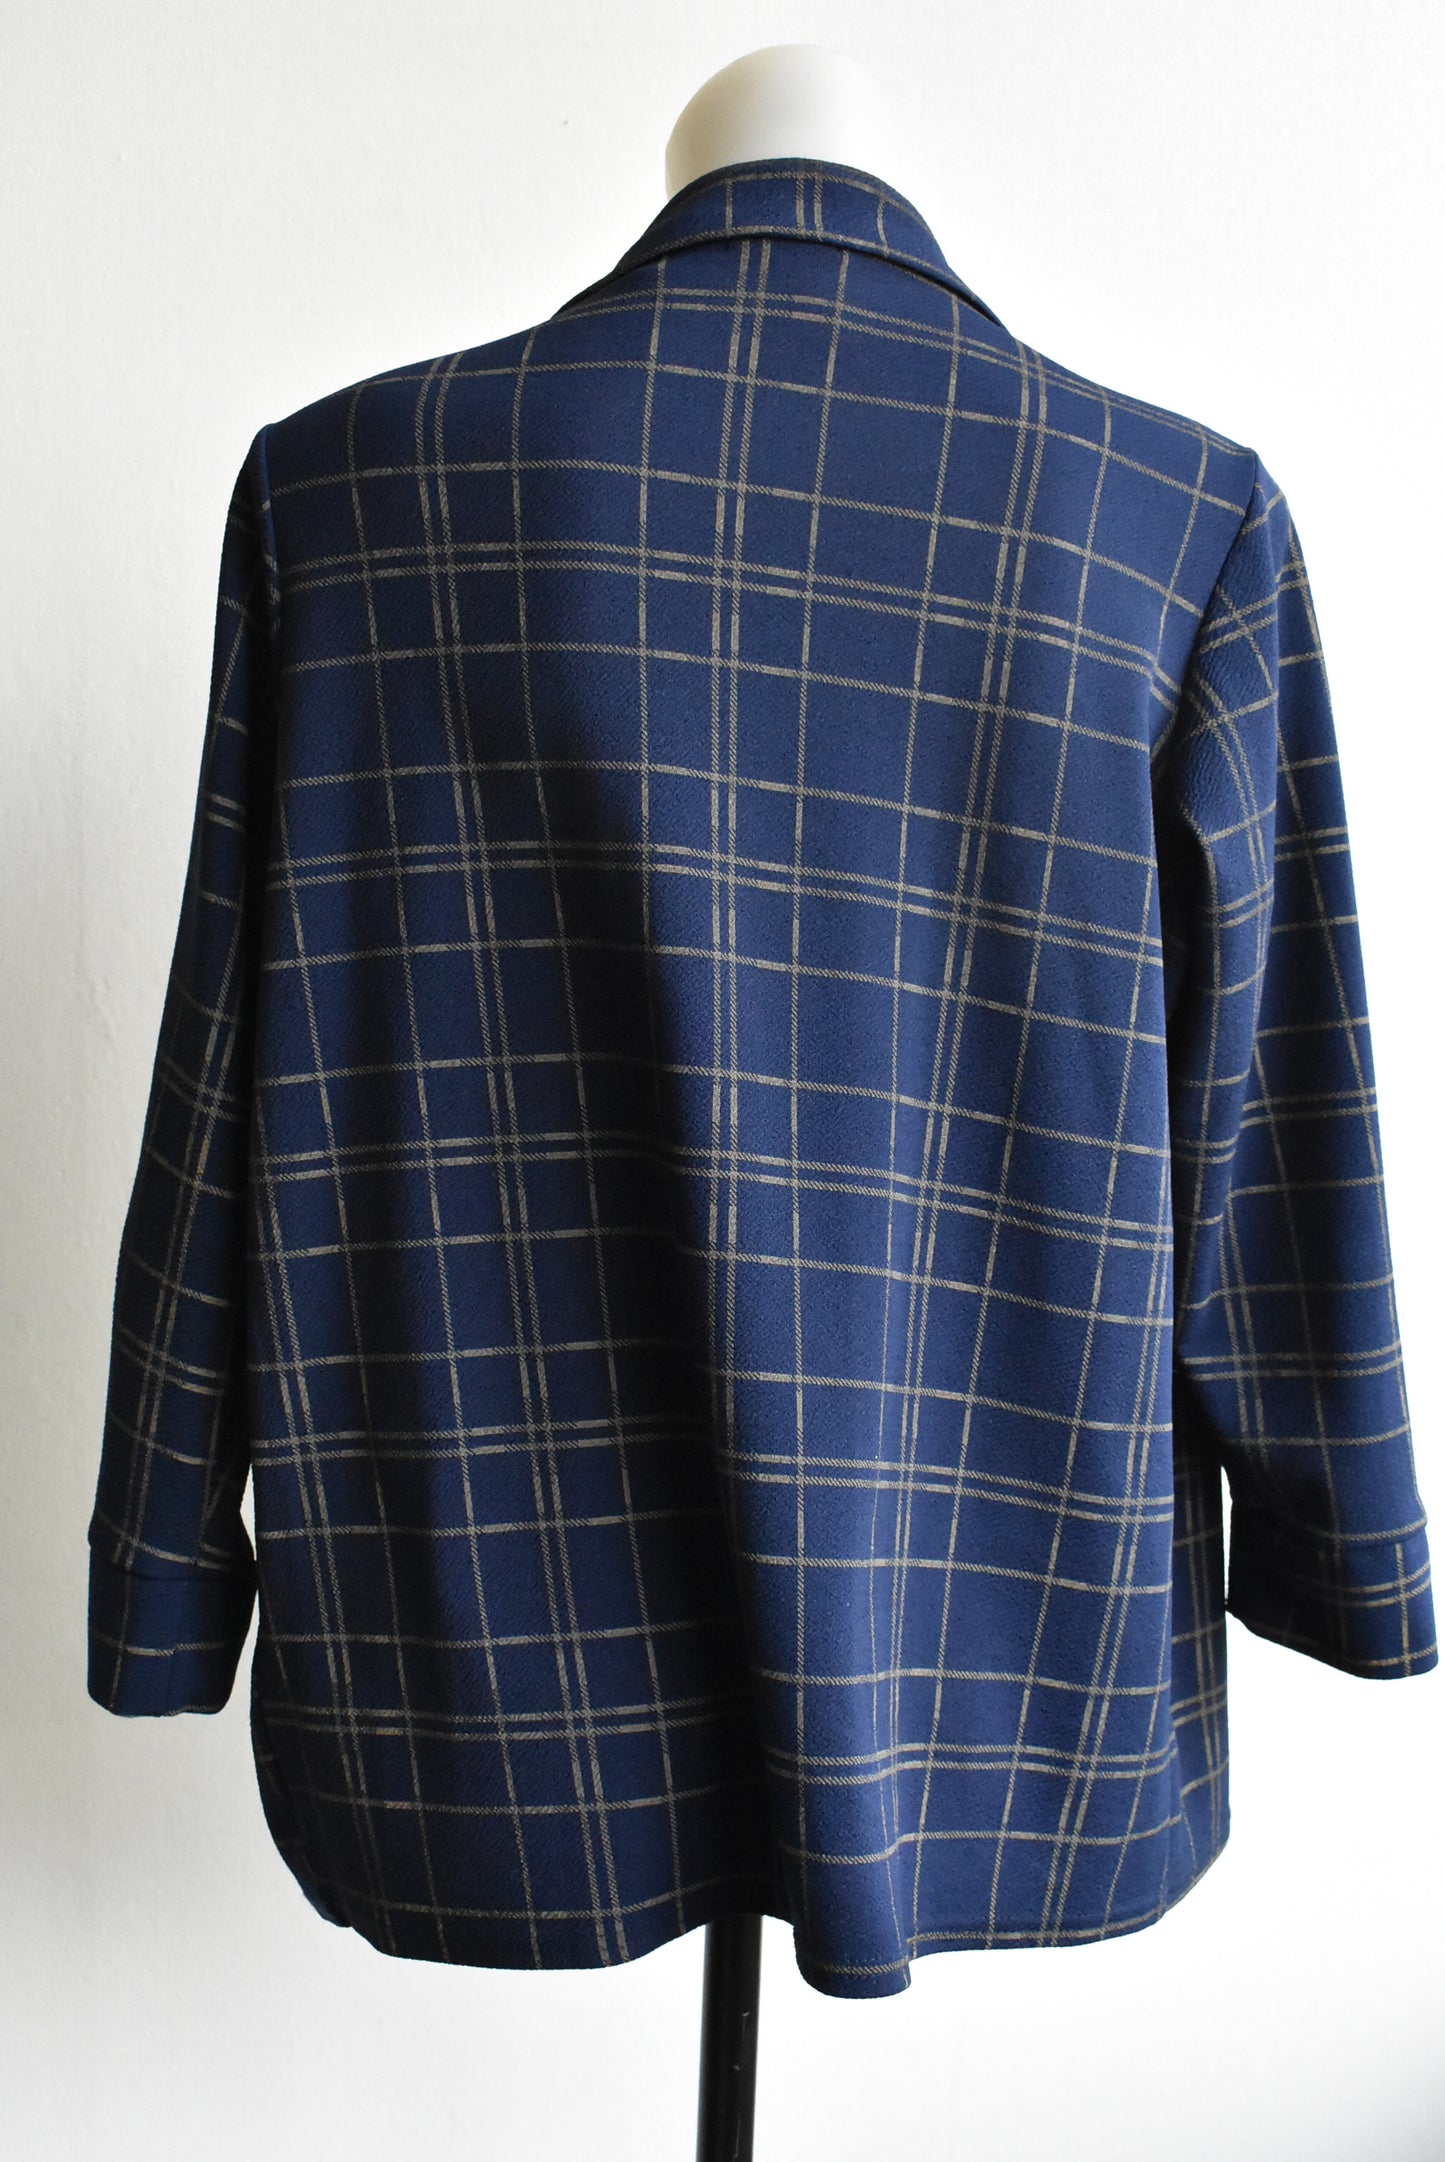 Boohoo navy top with a checkered pattern, size 12